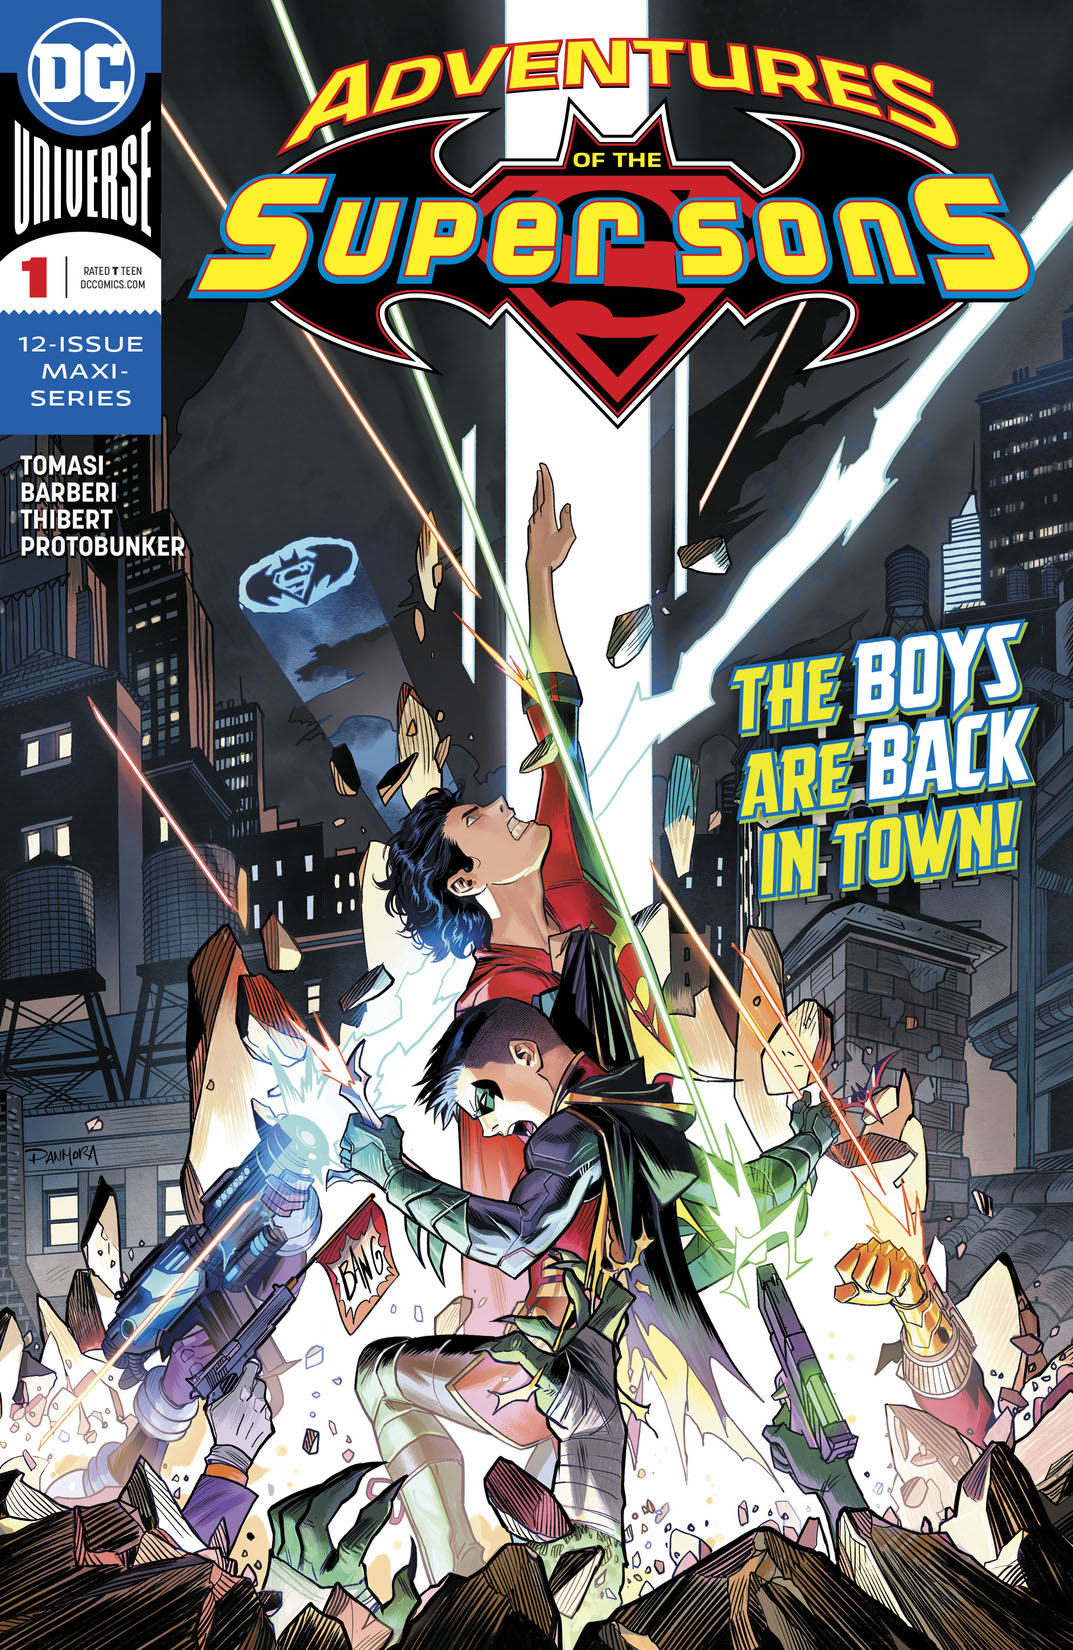 Adventures of the Super Sons #1 preview images